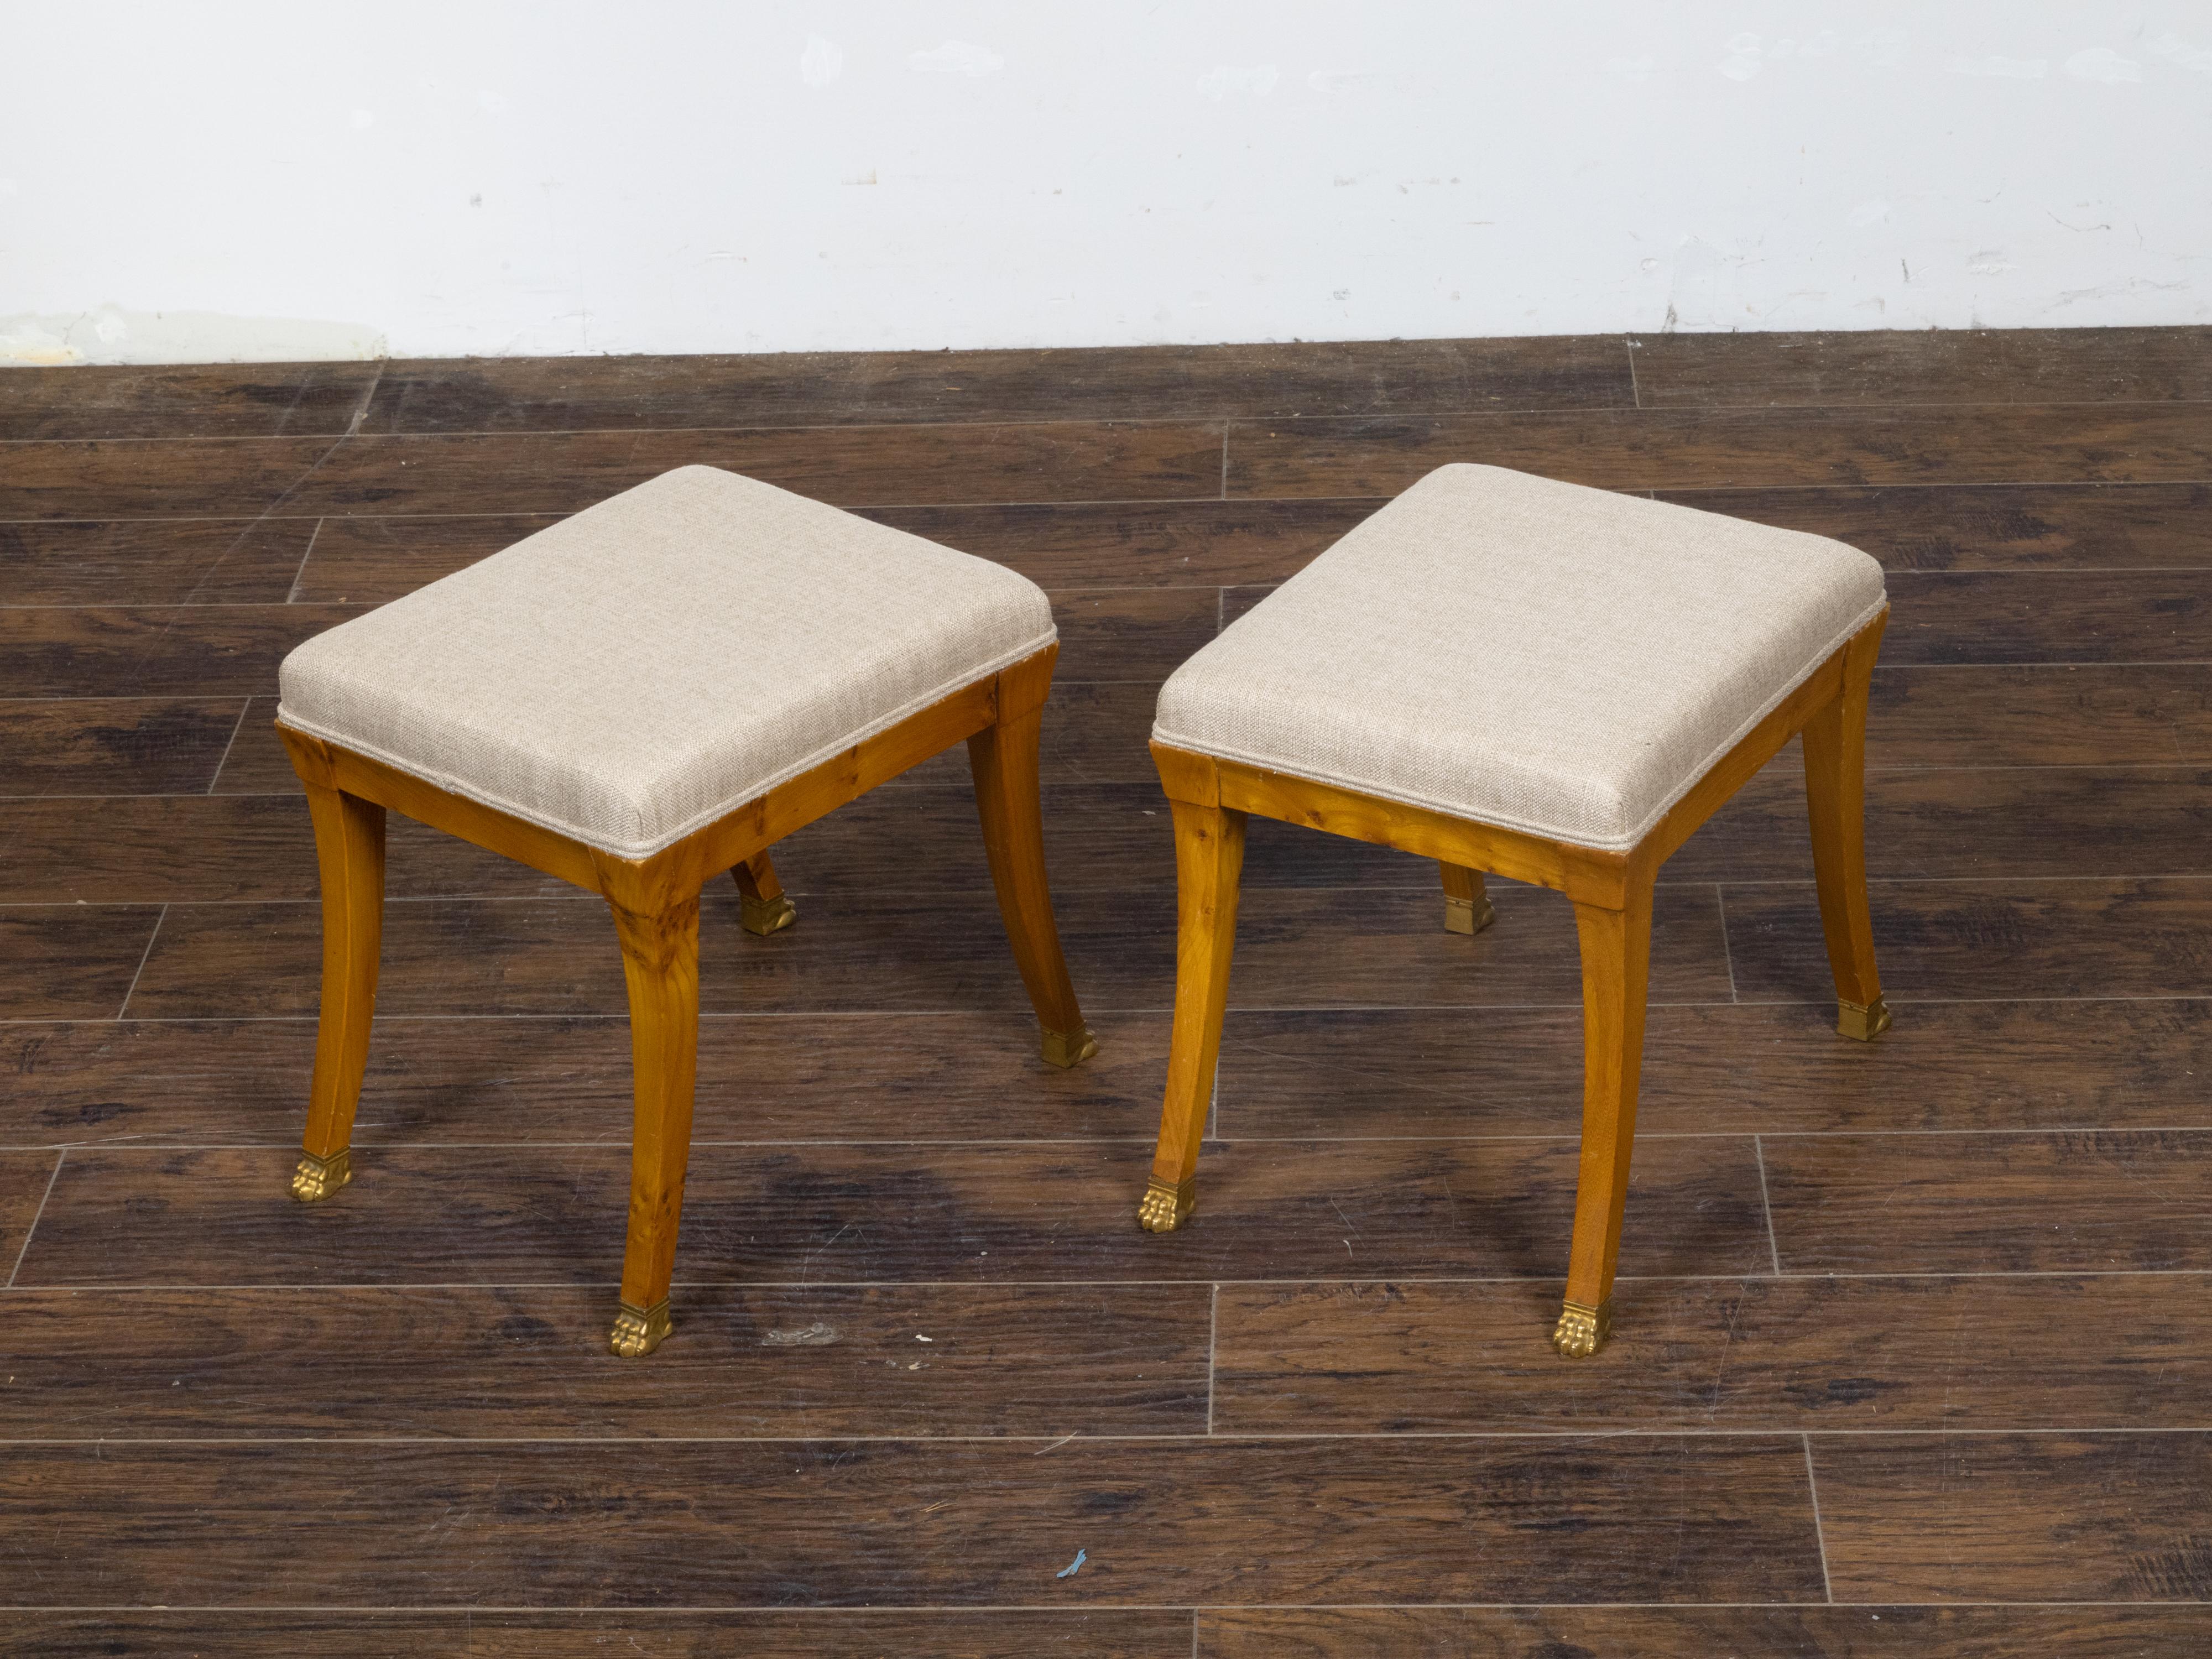 A pair of Austrian Biedermeier period walnut stools from the 19th century, with saber legs, carved giltwood lion paw feet and new custom linen upholstery. This pair of Austrian Biedermeier period walnut stools from the 19th century exudes an